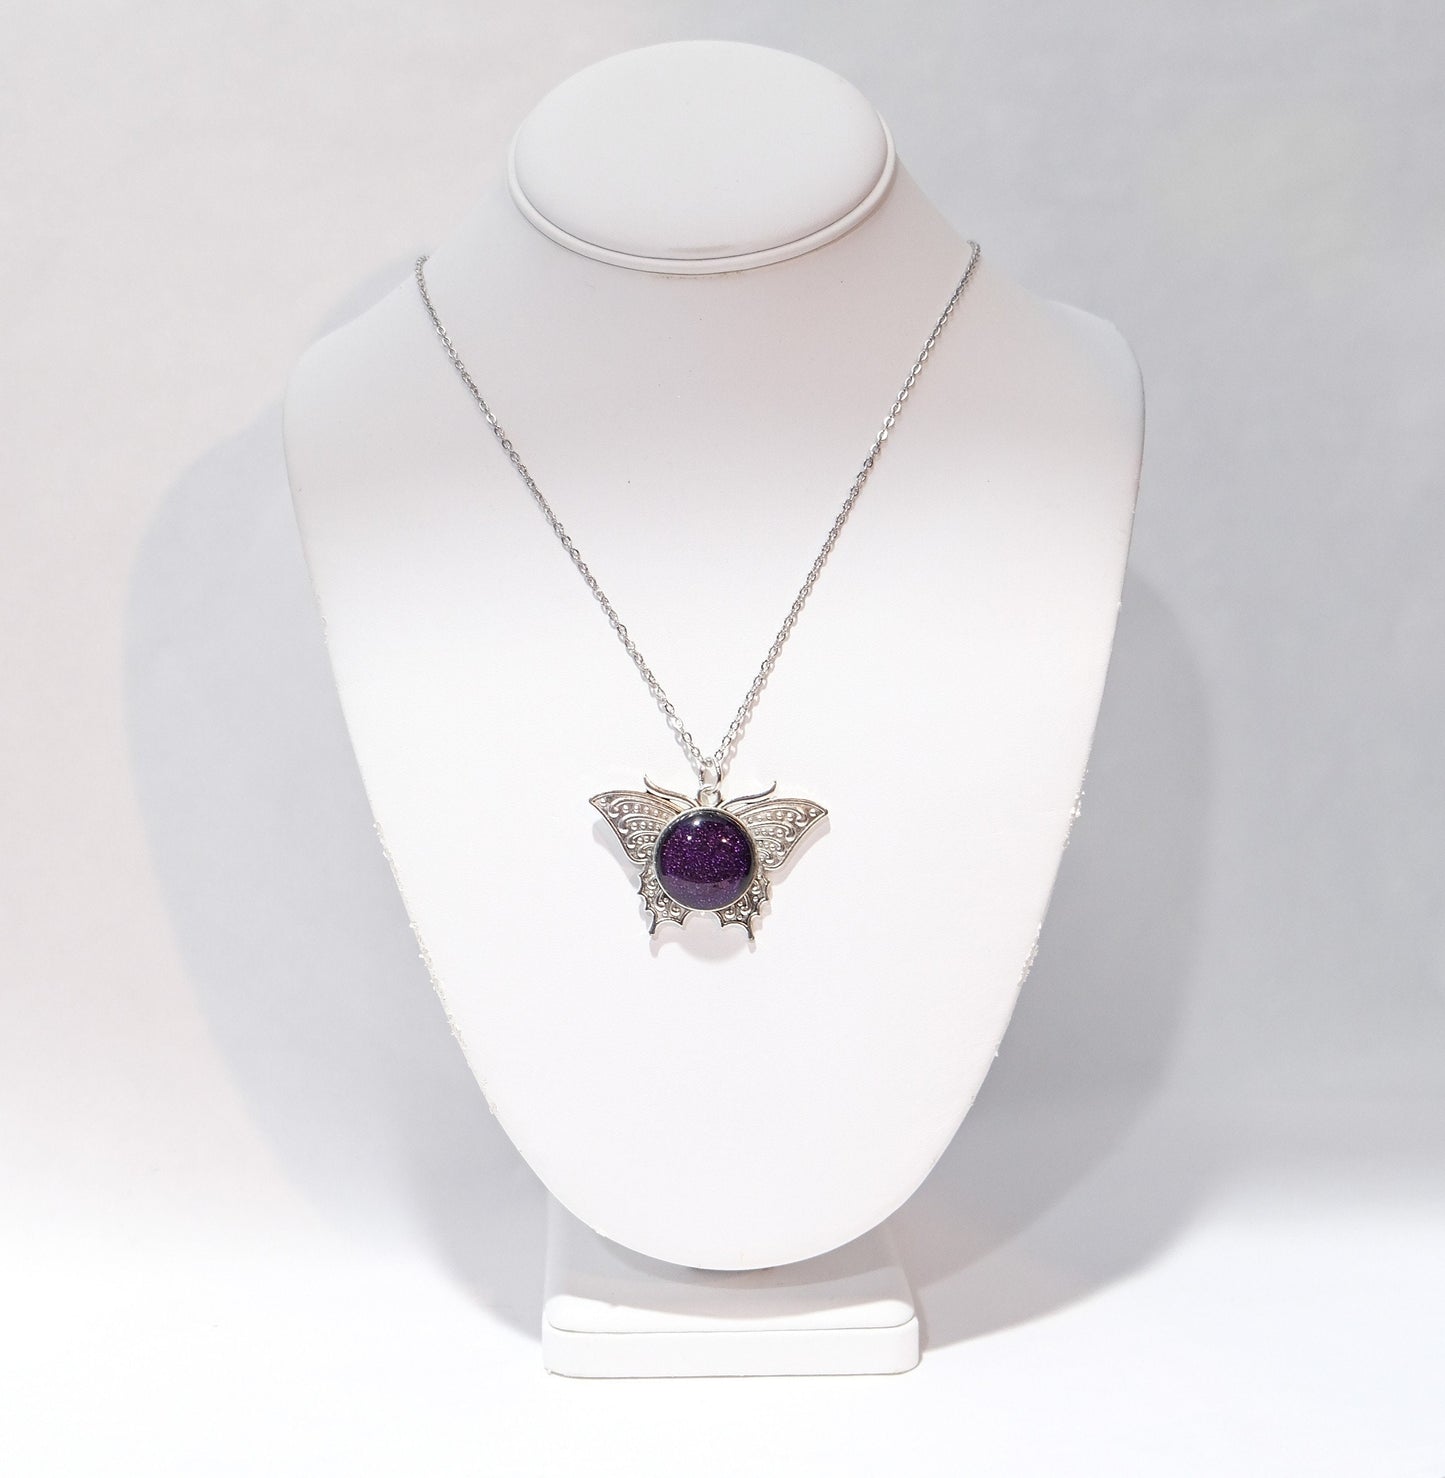 Butterfly pendant necklace, silver tone with dark purple dichroic fused glass center stone on a 20 inch steel chain